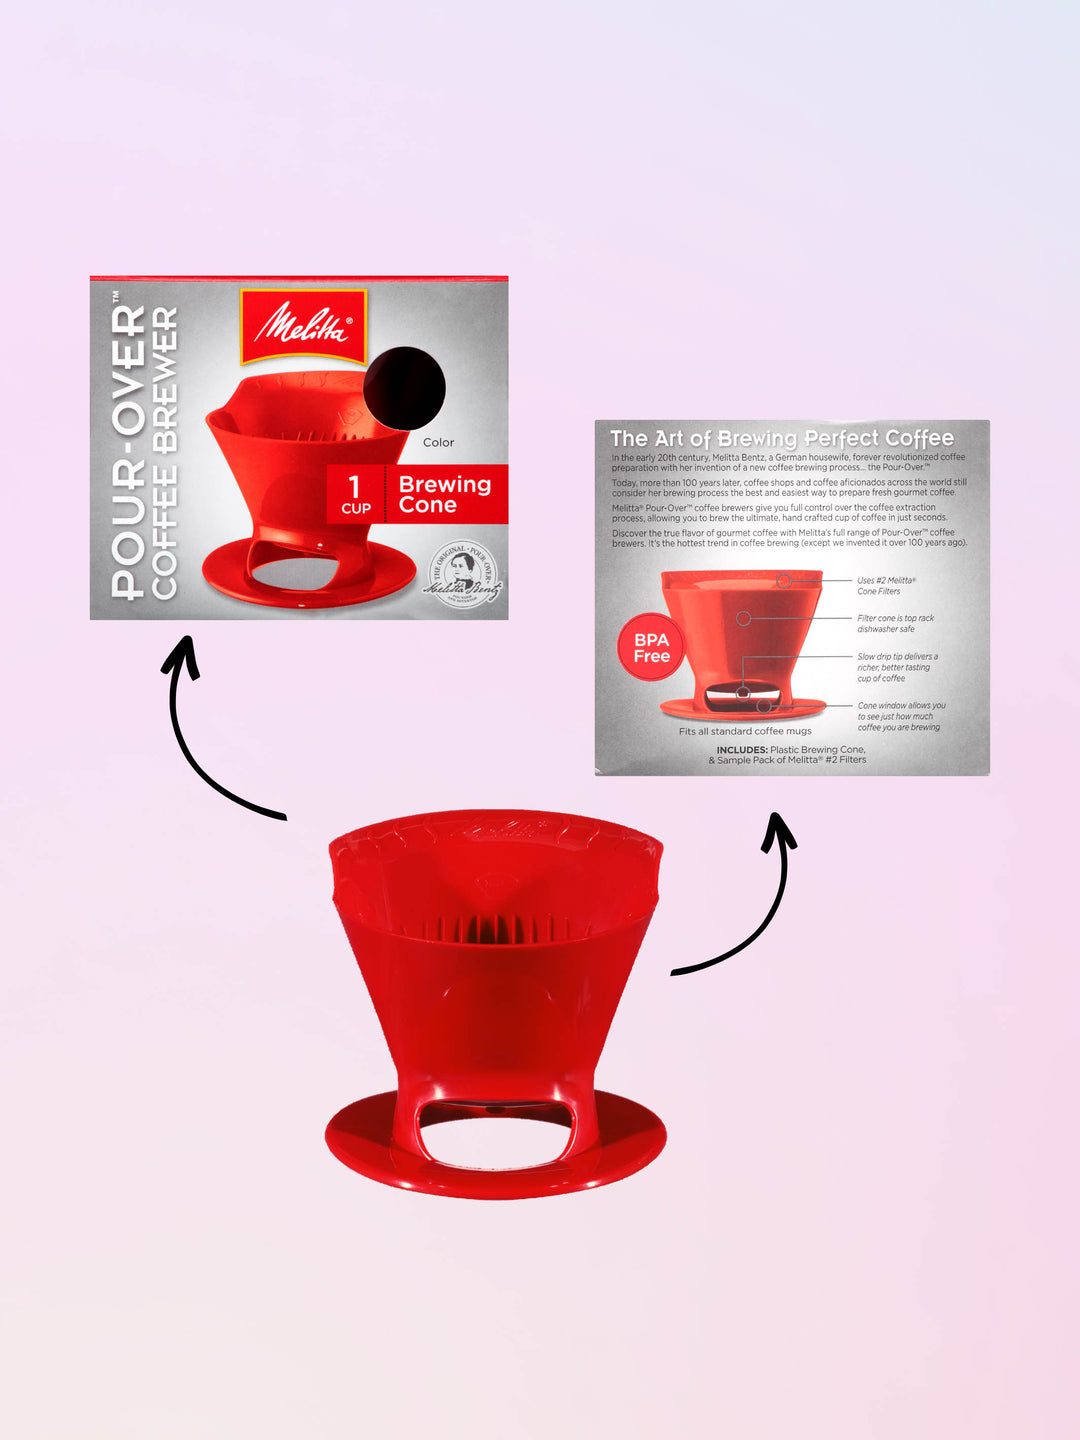 Red plastic Melitta pour-over coffee brewer with arrows pointing to front and back panels of box.